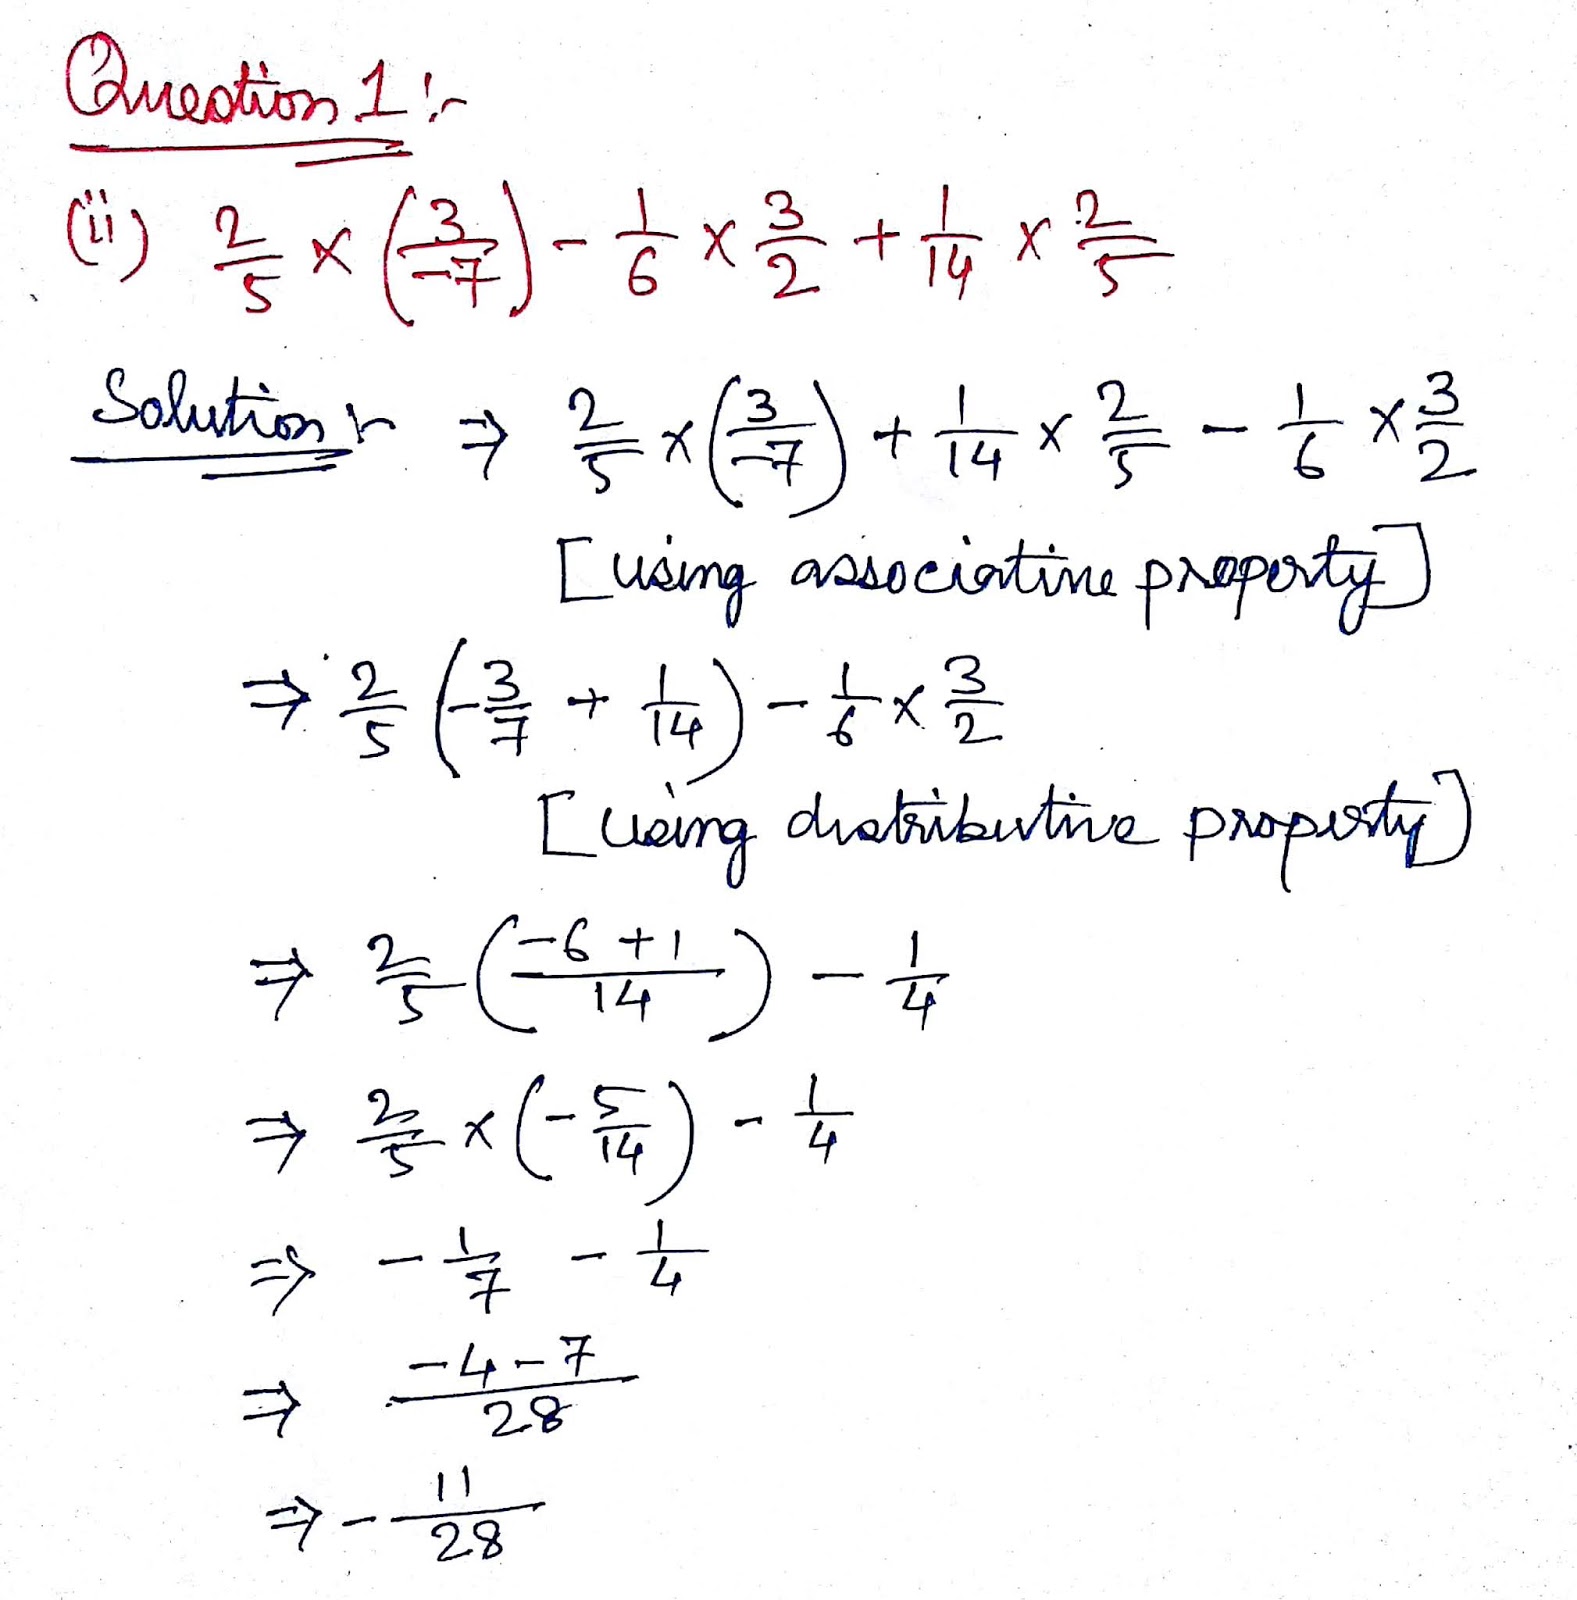 ncert-solution-for-rational-numbers-class-8-maths-chapter-1